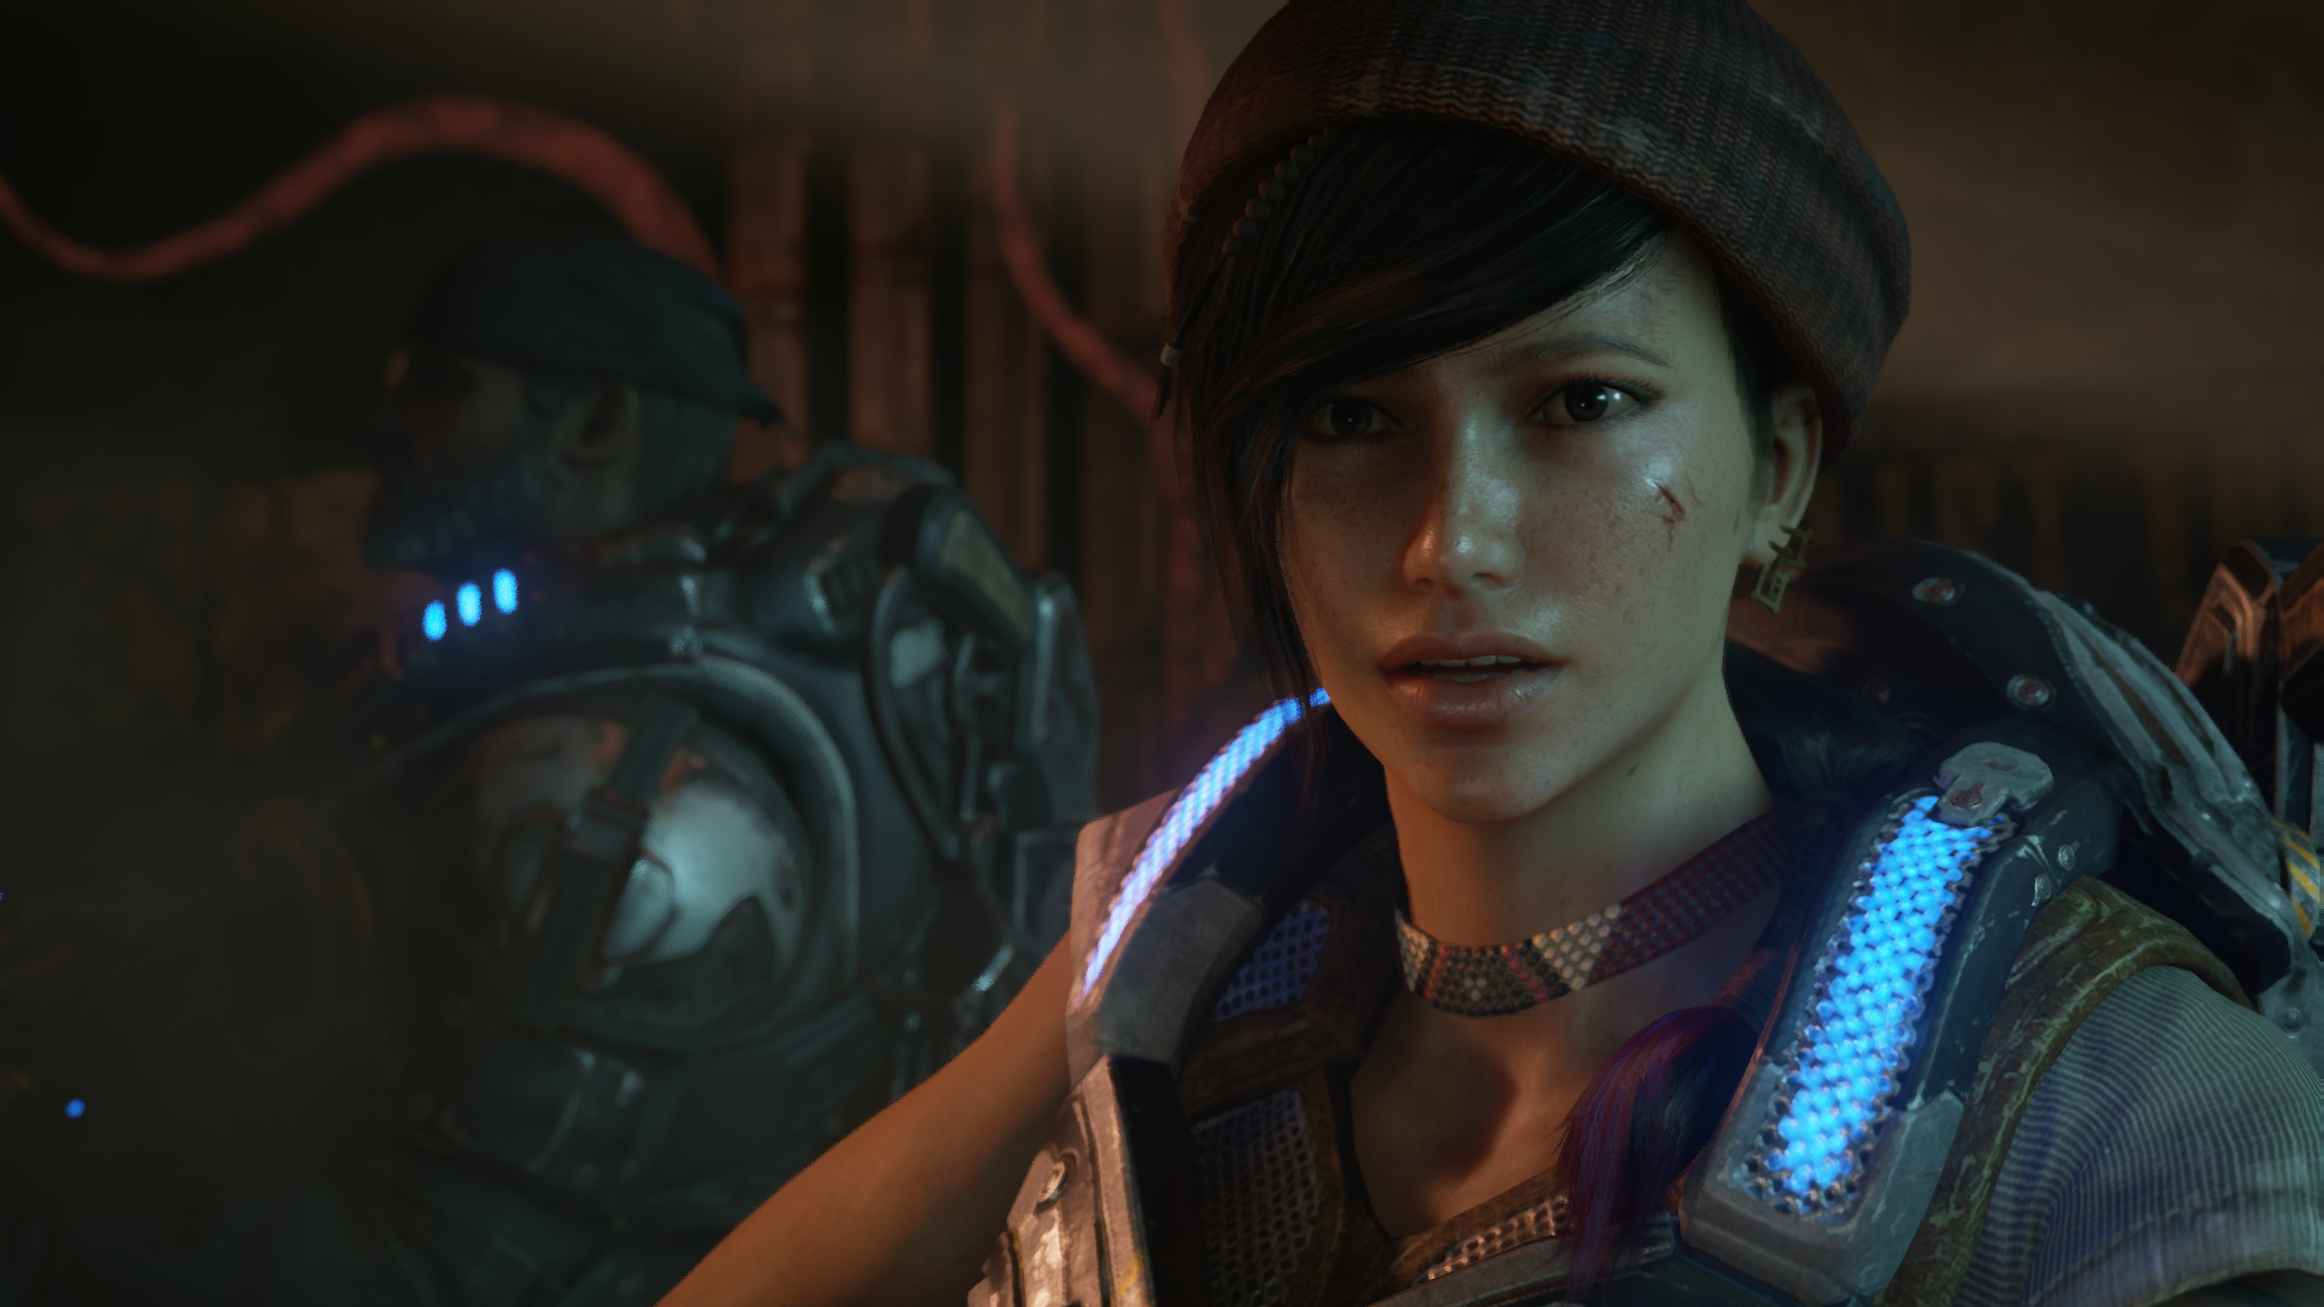 Gears of War: Ultimate Edition includes DirectX 12, 4K graphics on PC